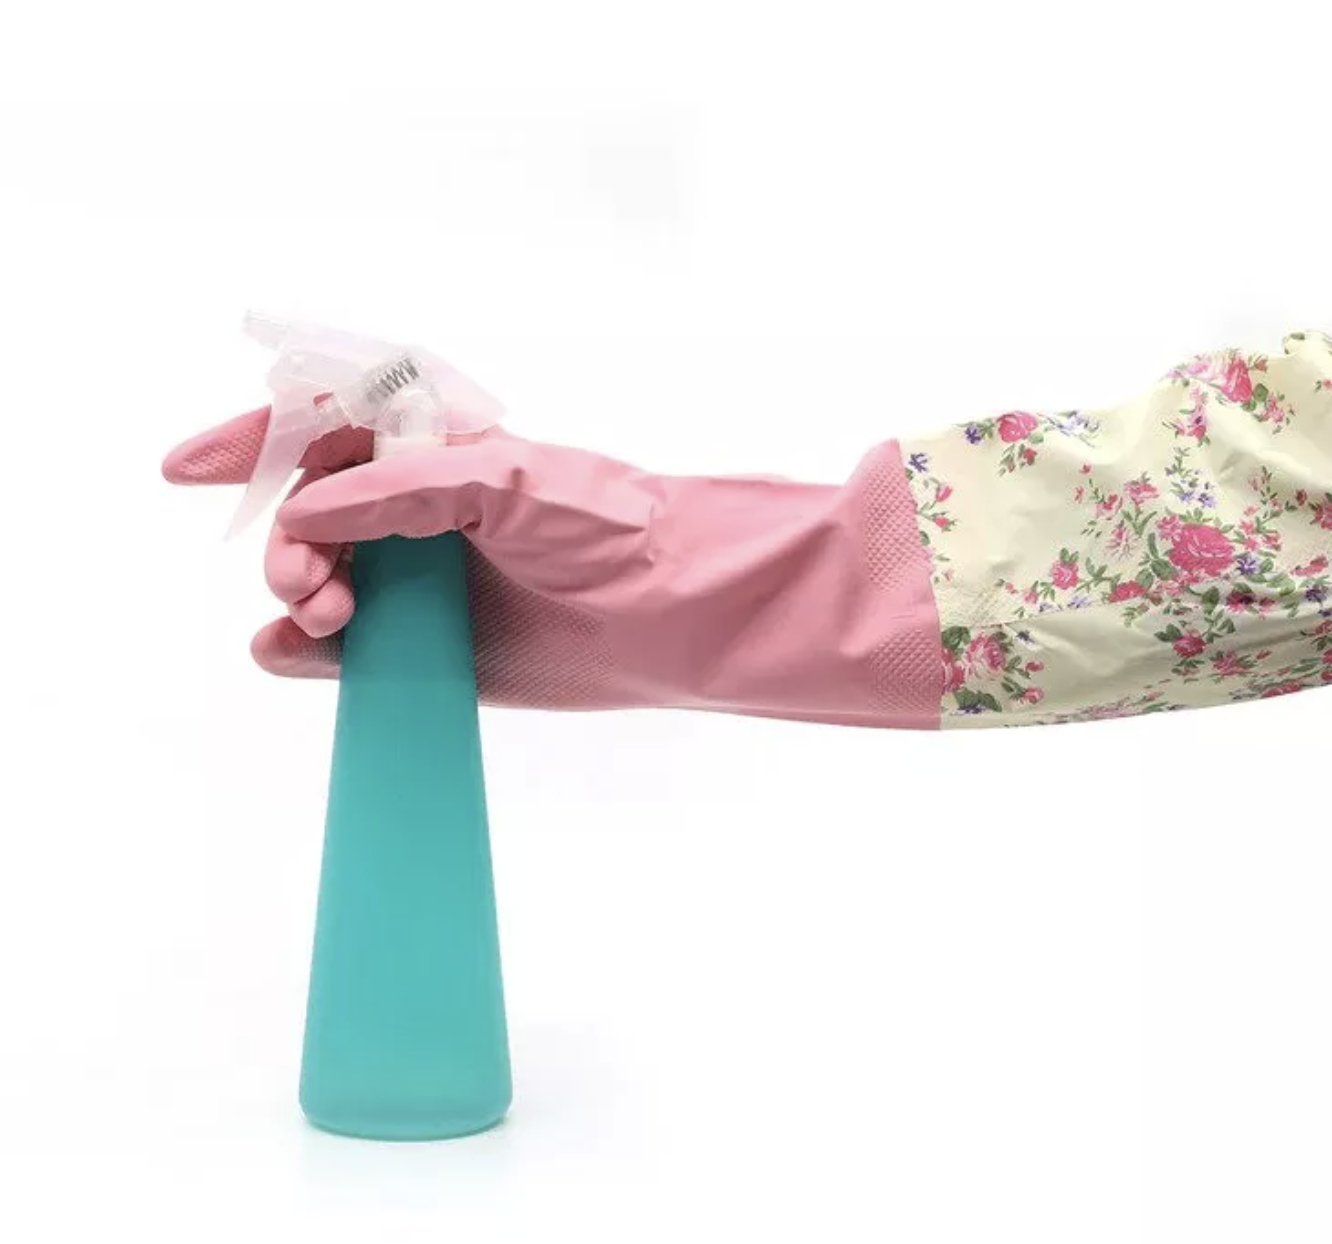 a hand holding a squirt bottle wearing long pink beige and floral cleaning gloves